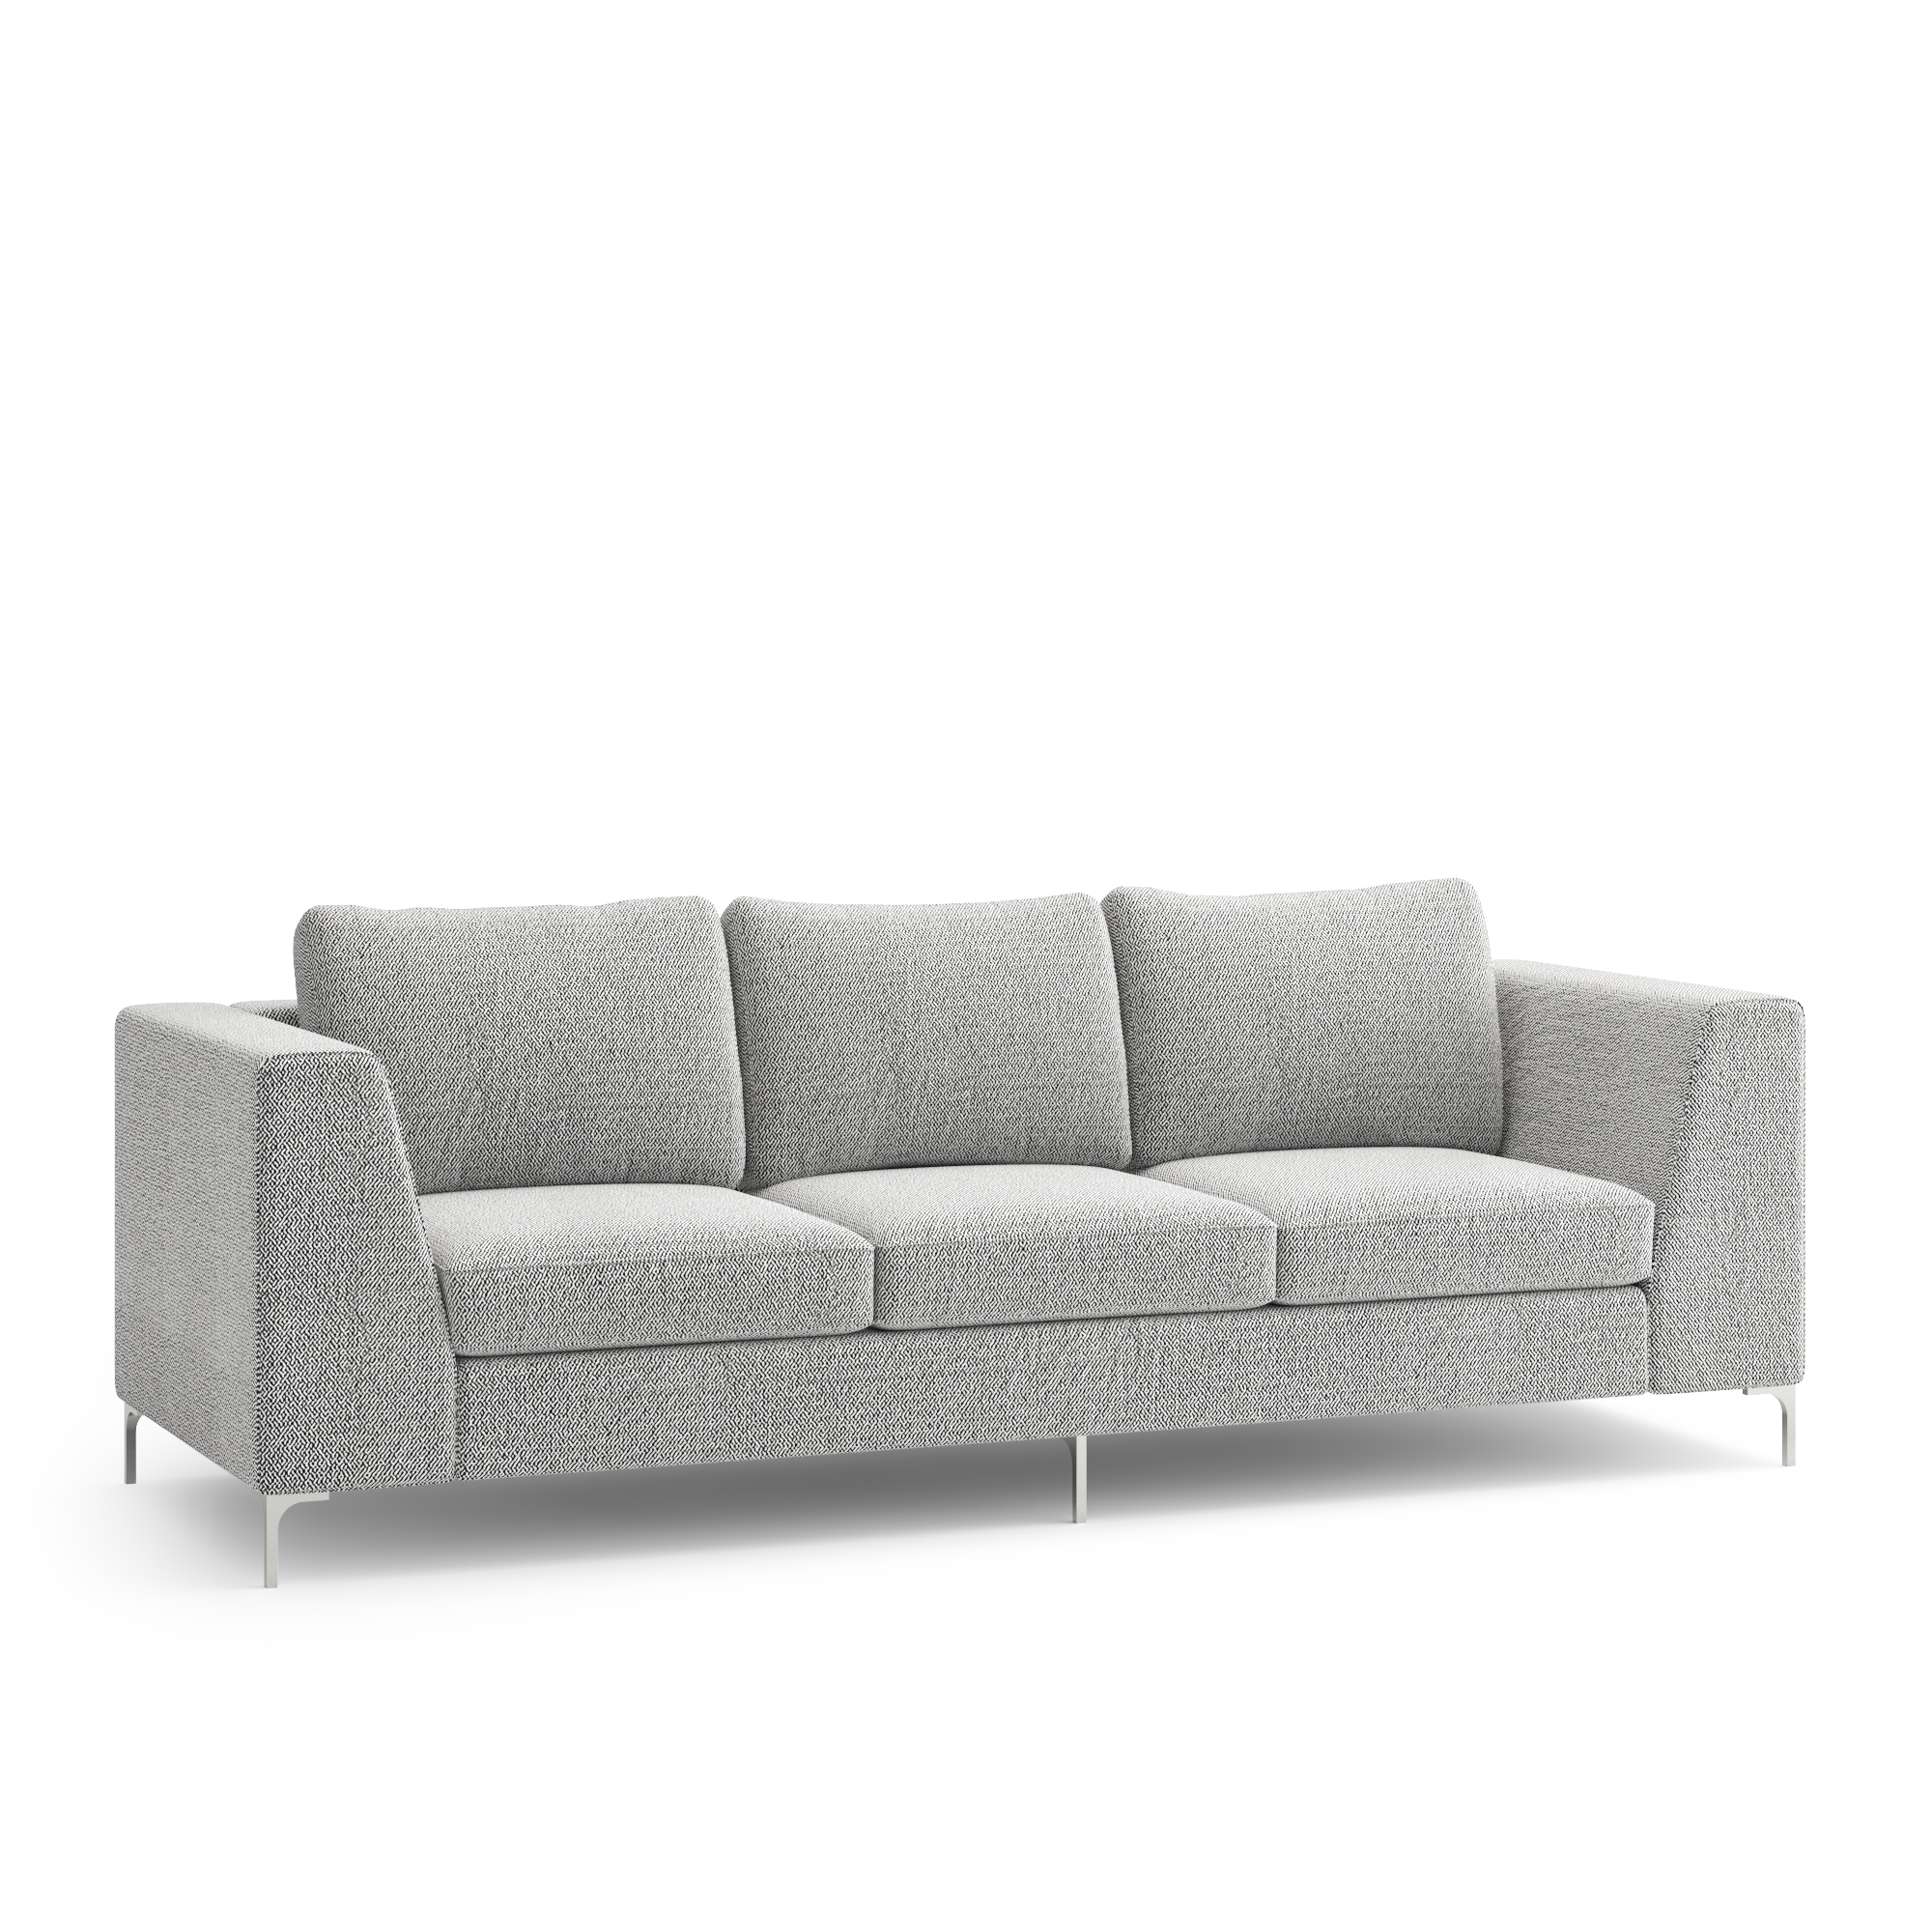 Soft Seating Aged Care Newport sofa, side view